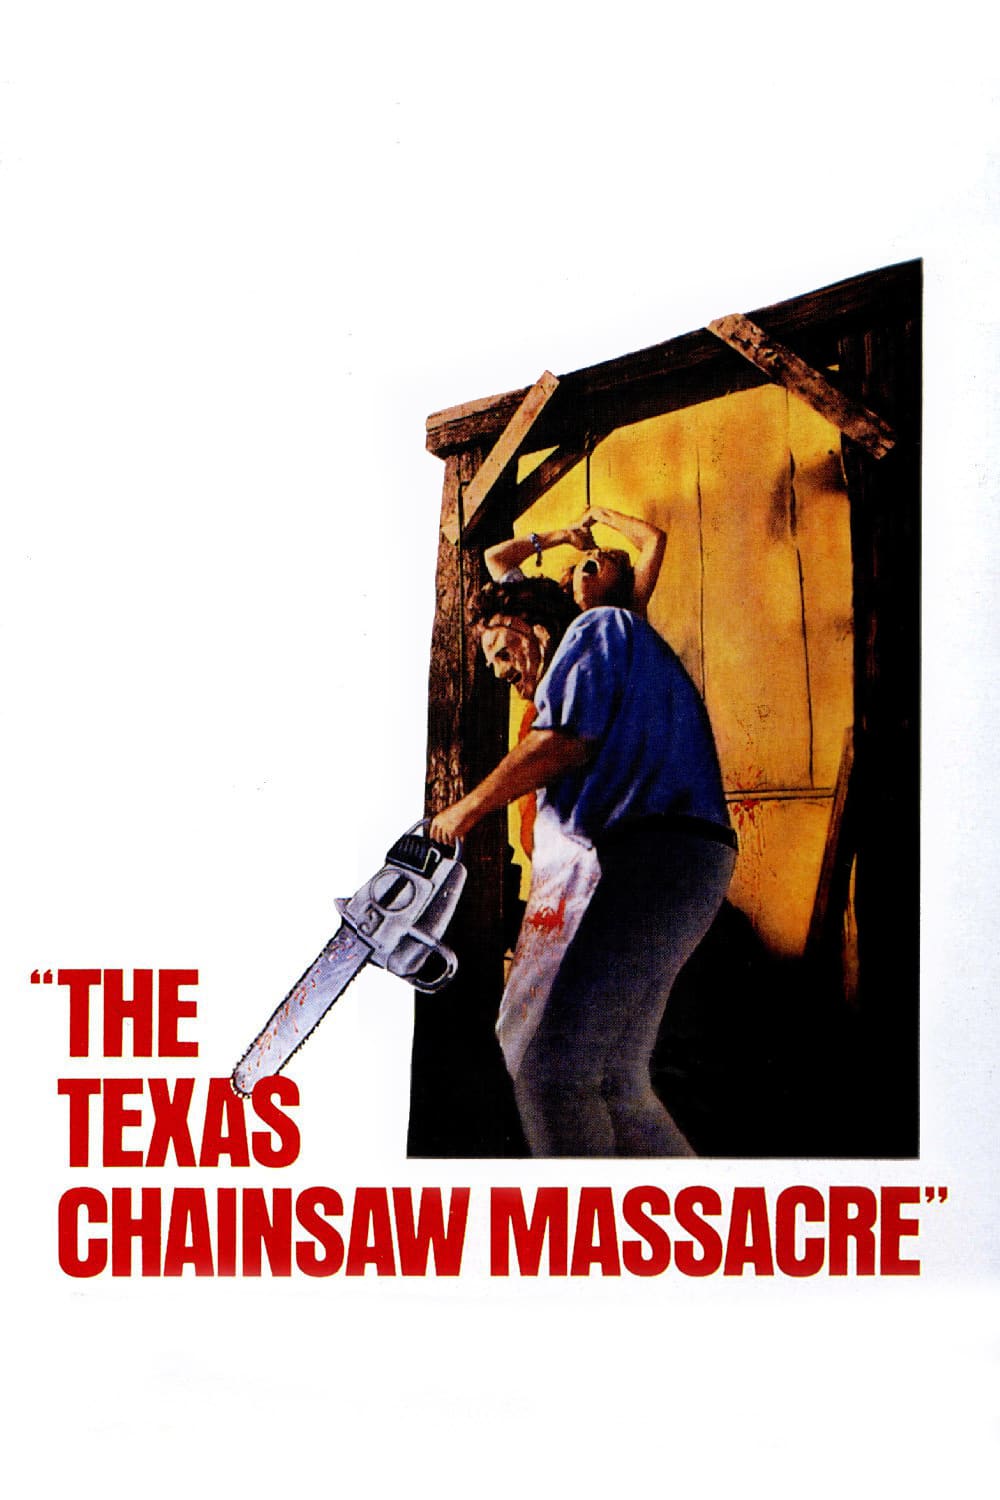 The Texas Chain Saw Massacre (1974) Movie Poster High Quality Glossy Paper A1 A2 A3 A4 A3 Framed or Unframed!!!